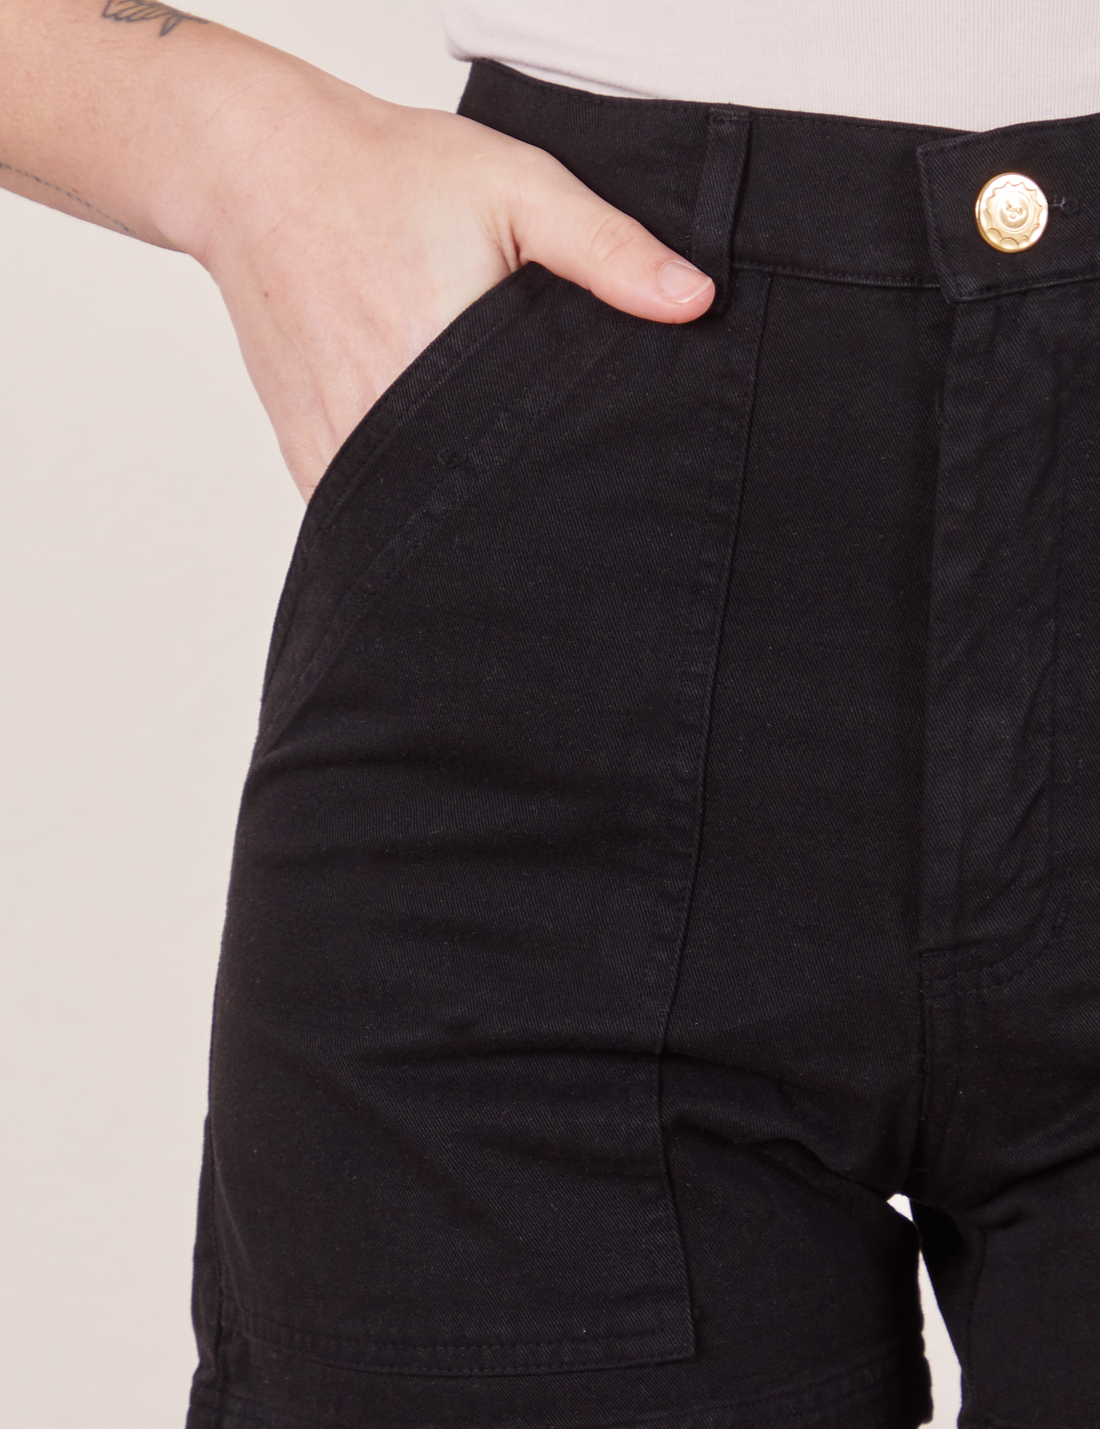 Classic Work Shorts in Basic Black front pocket close up on Alex with hand in pocket